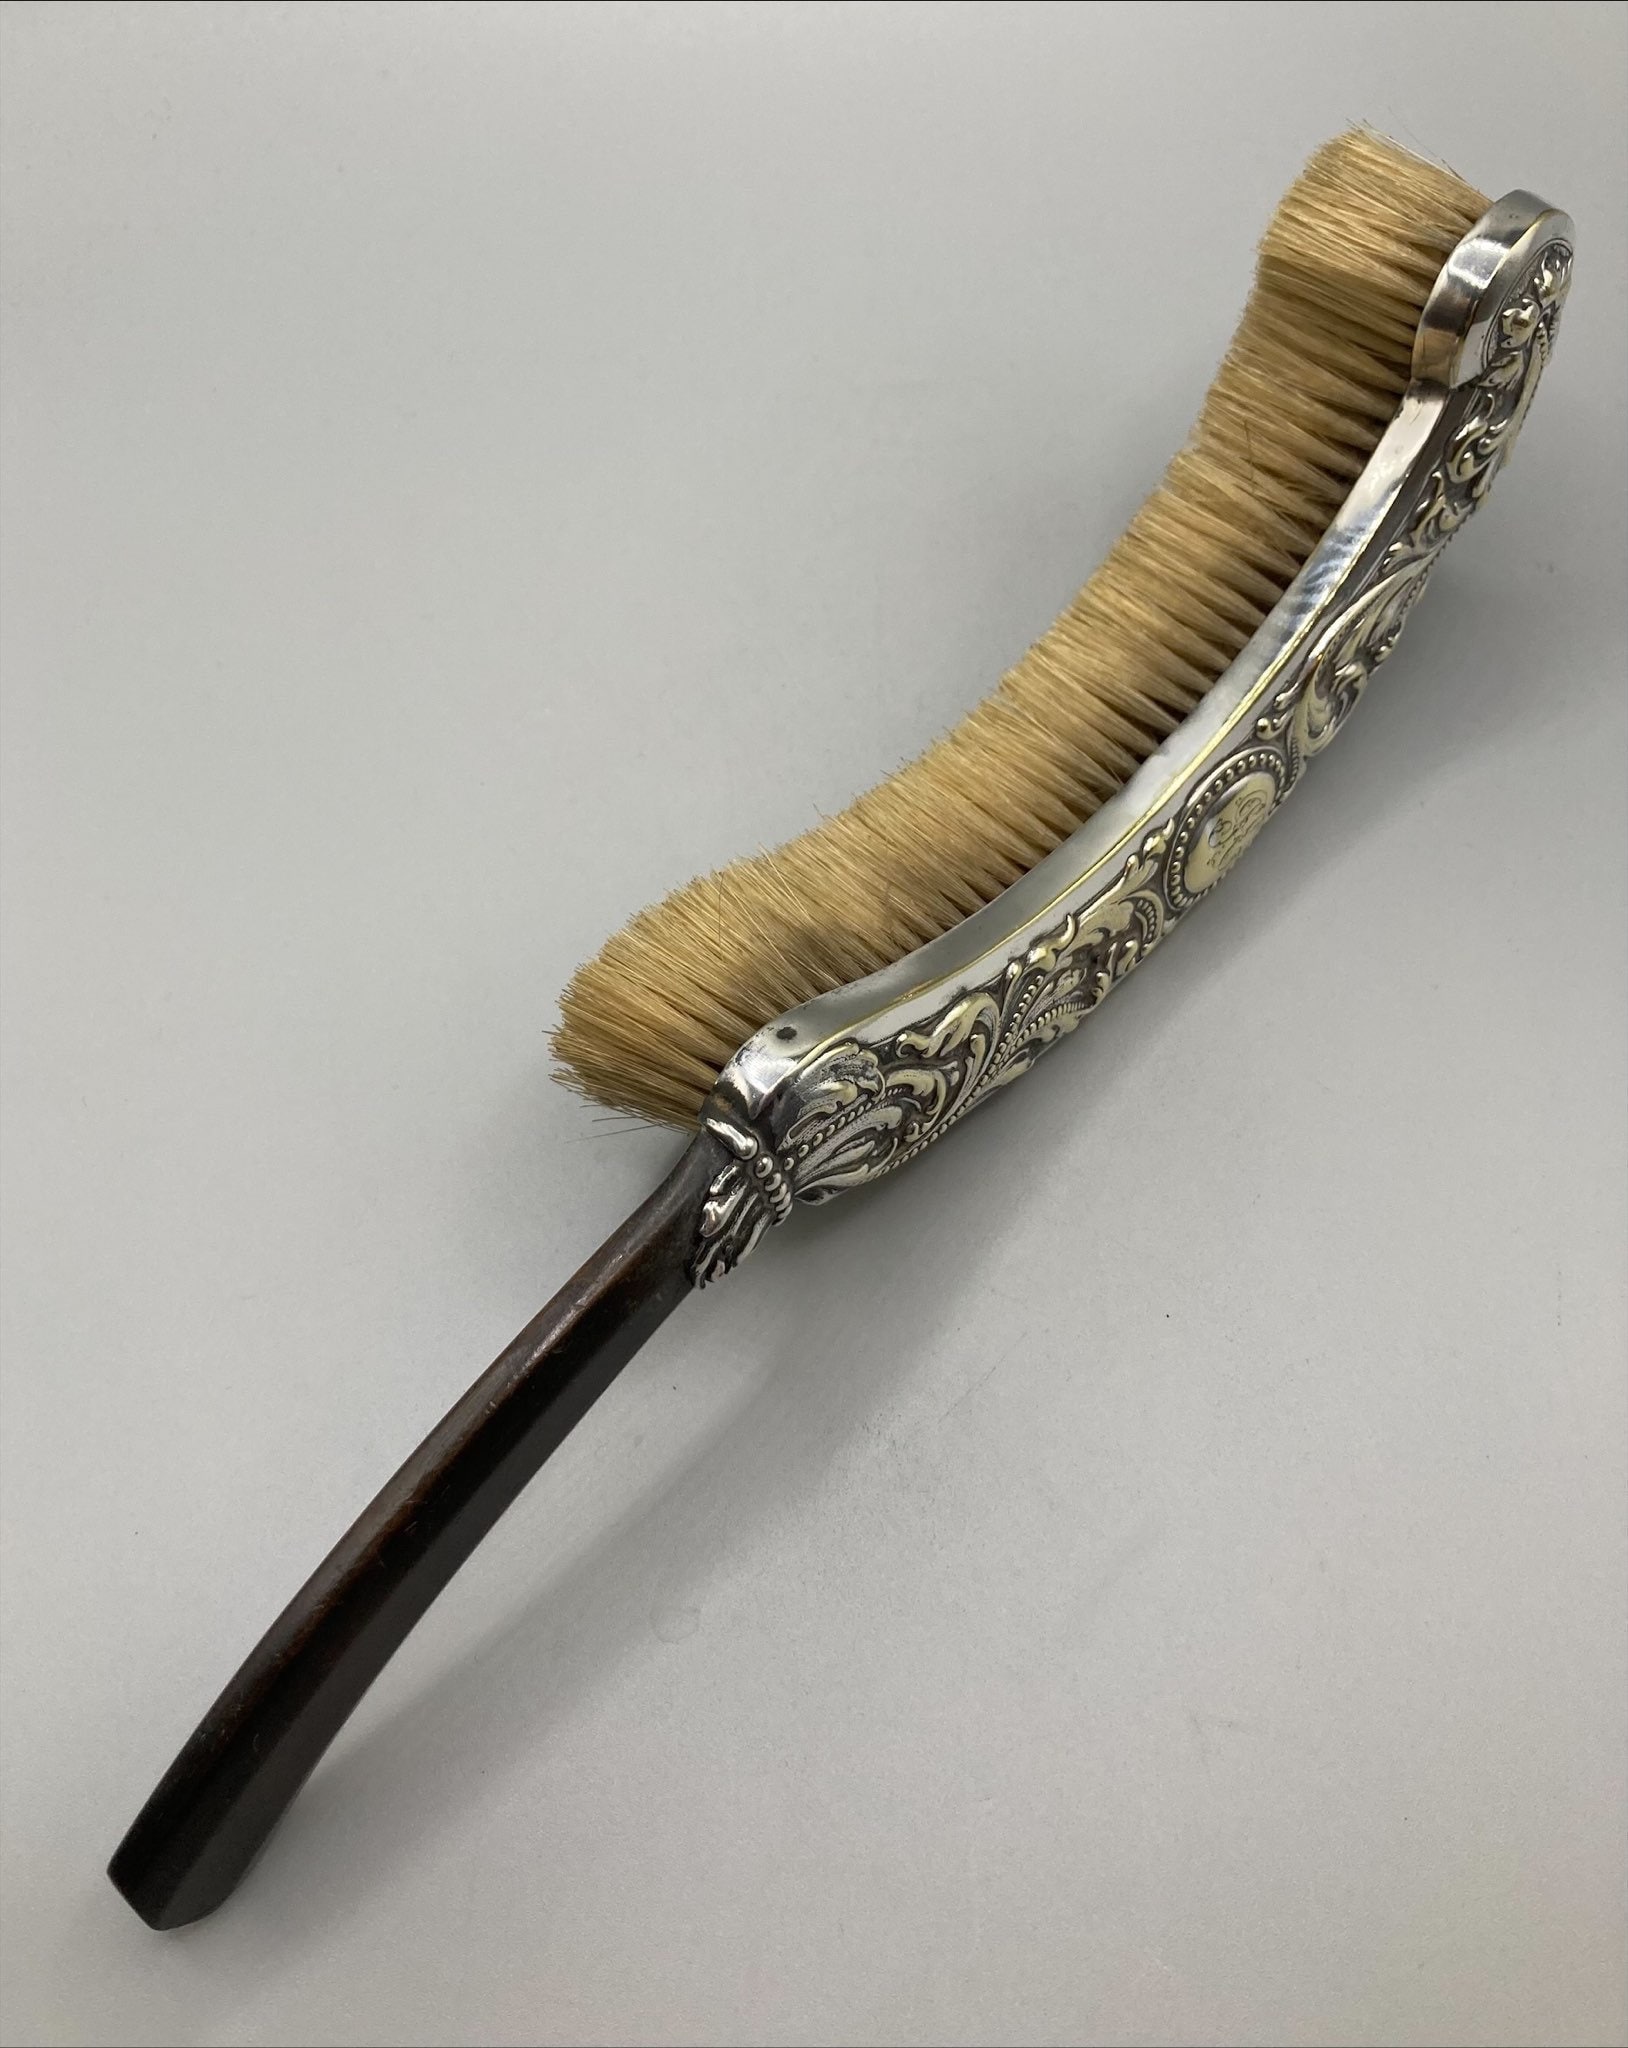 Antique American Art Nouveau Sterling Silver Table Crumb Brush by